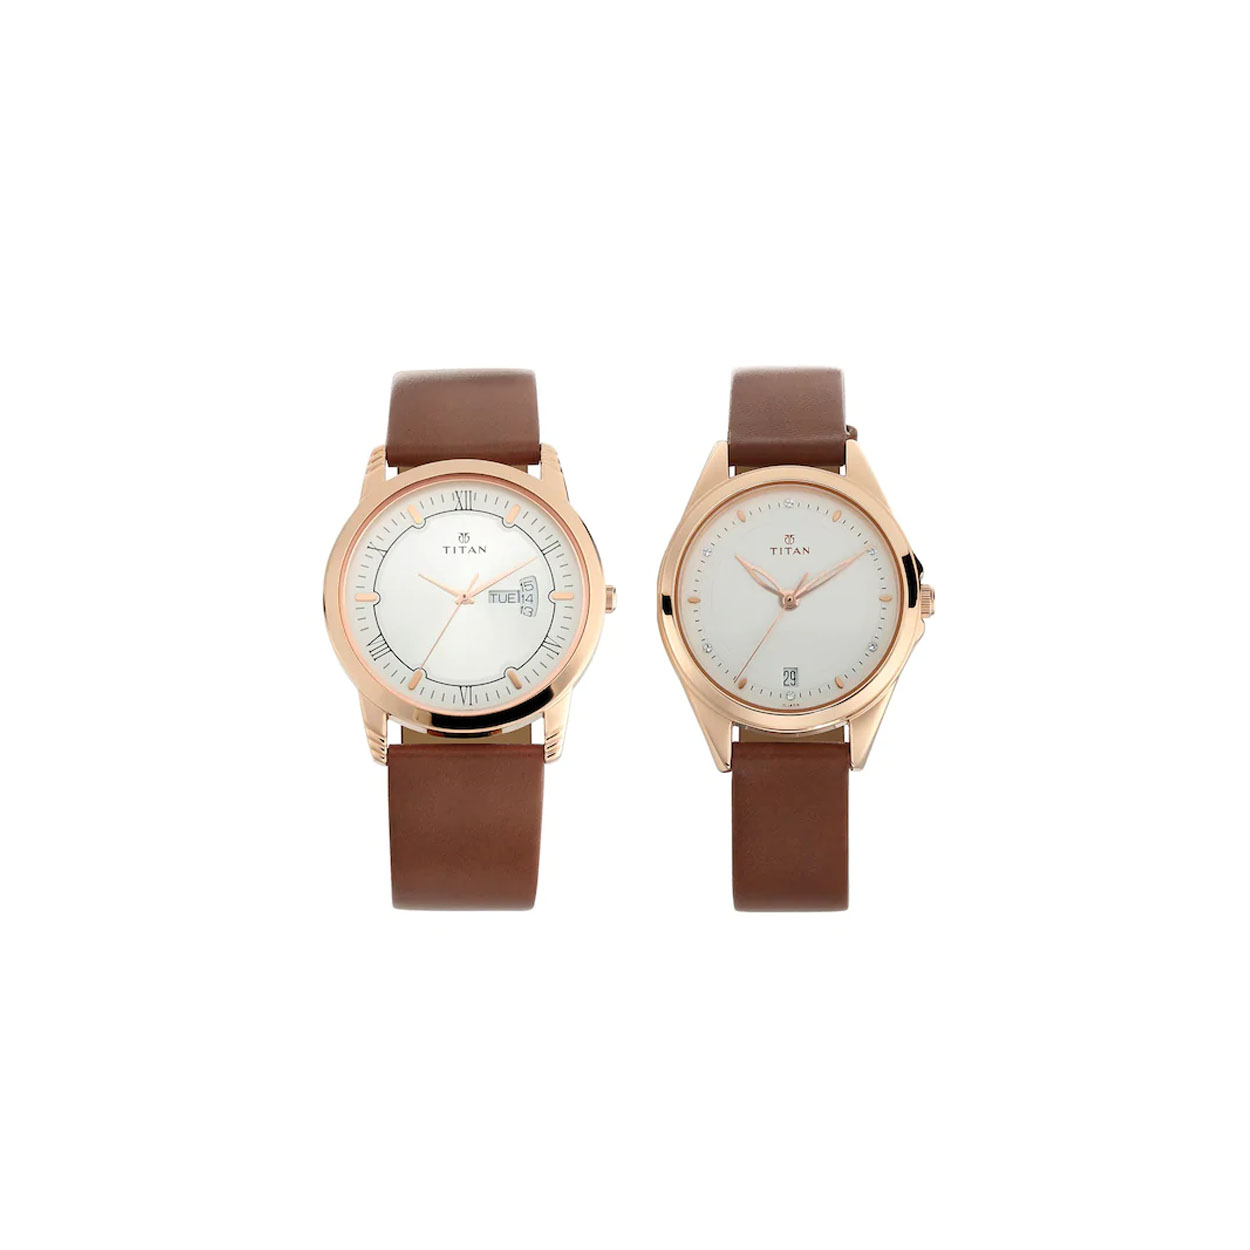 Bandhan Silver White Dial Leather Pair Watches